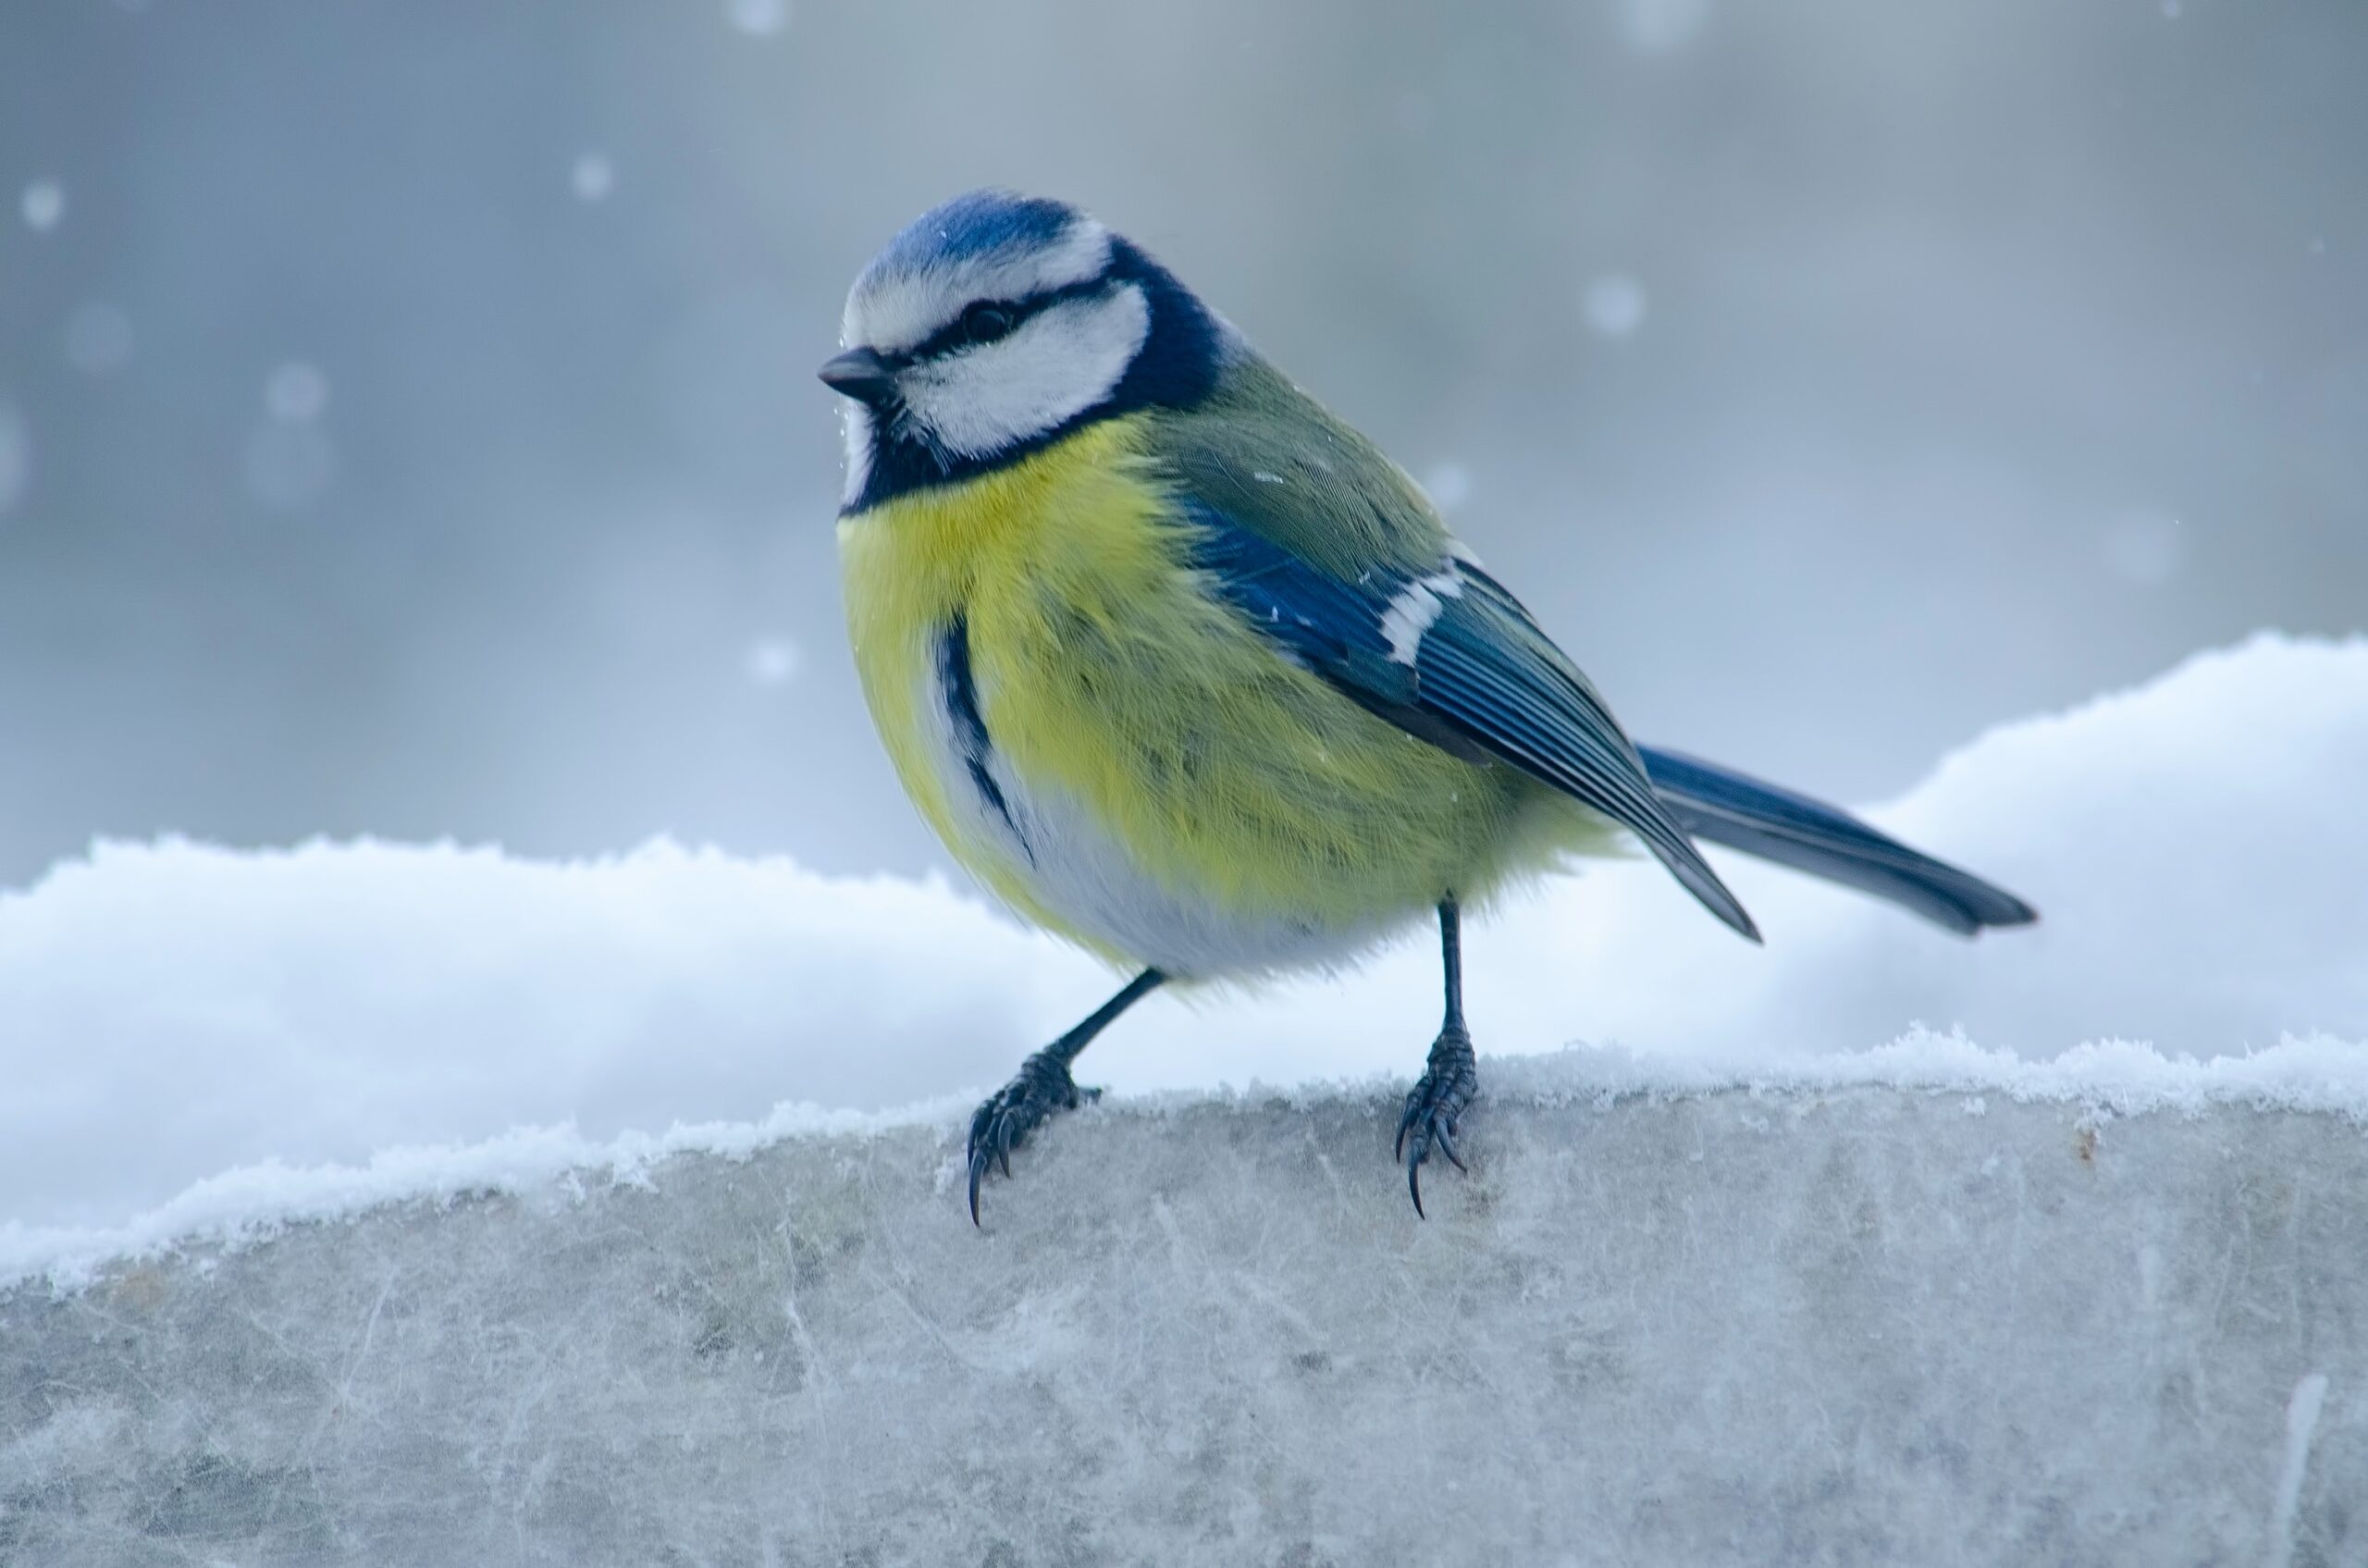 A Yellow and Blue Bird Standing on Snow